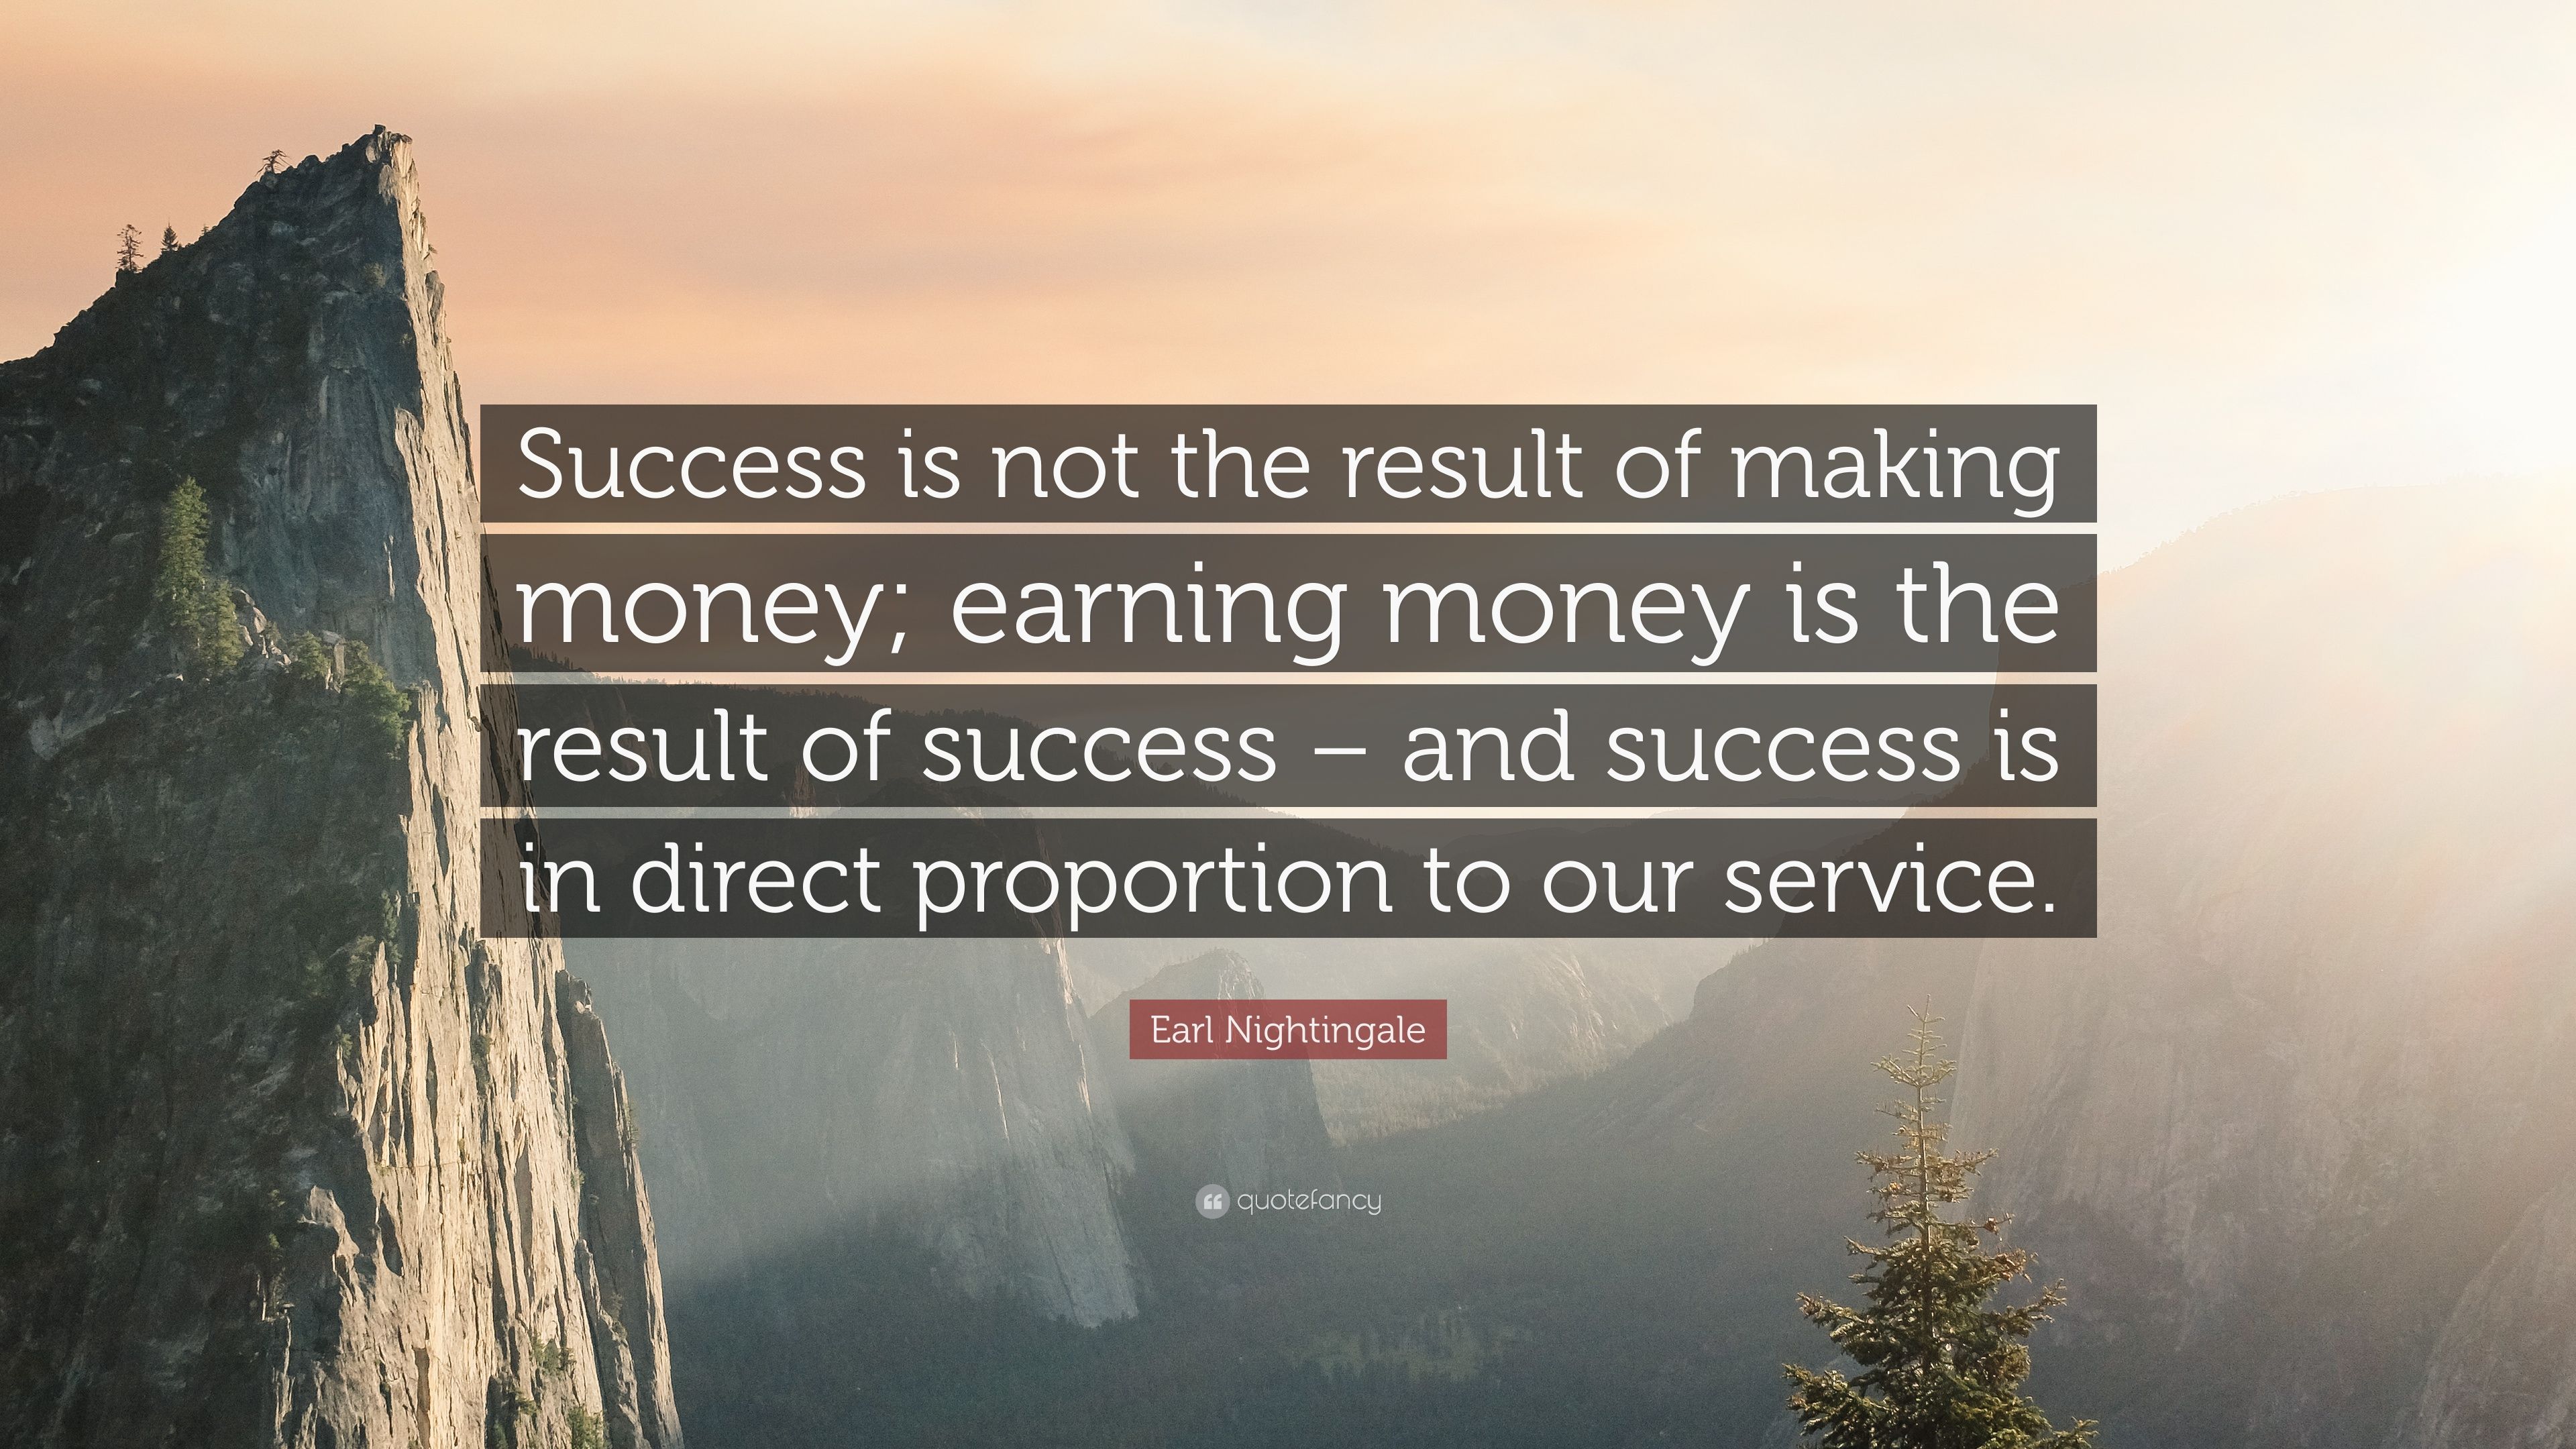 Earl Nightingale Quote: “Success is not the result of making money; earning money is the result of success